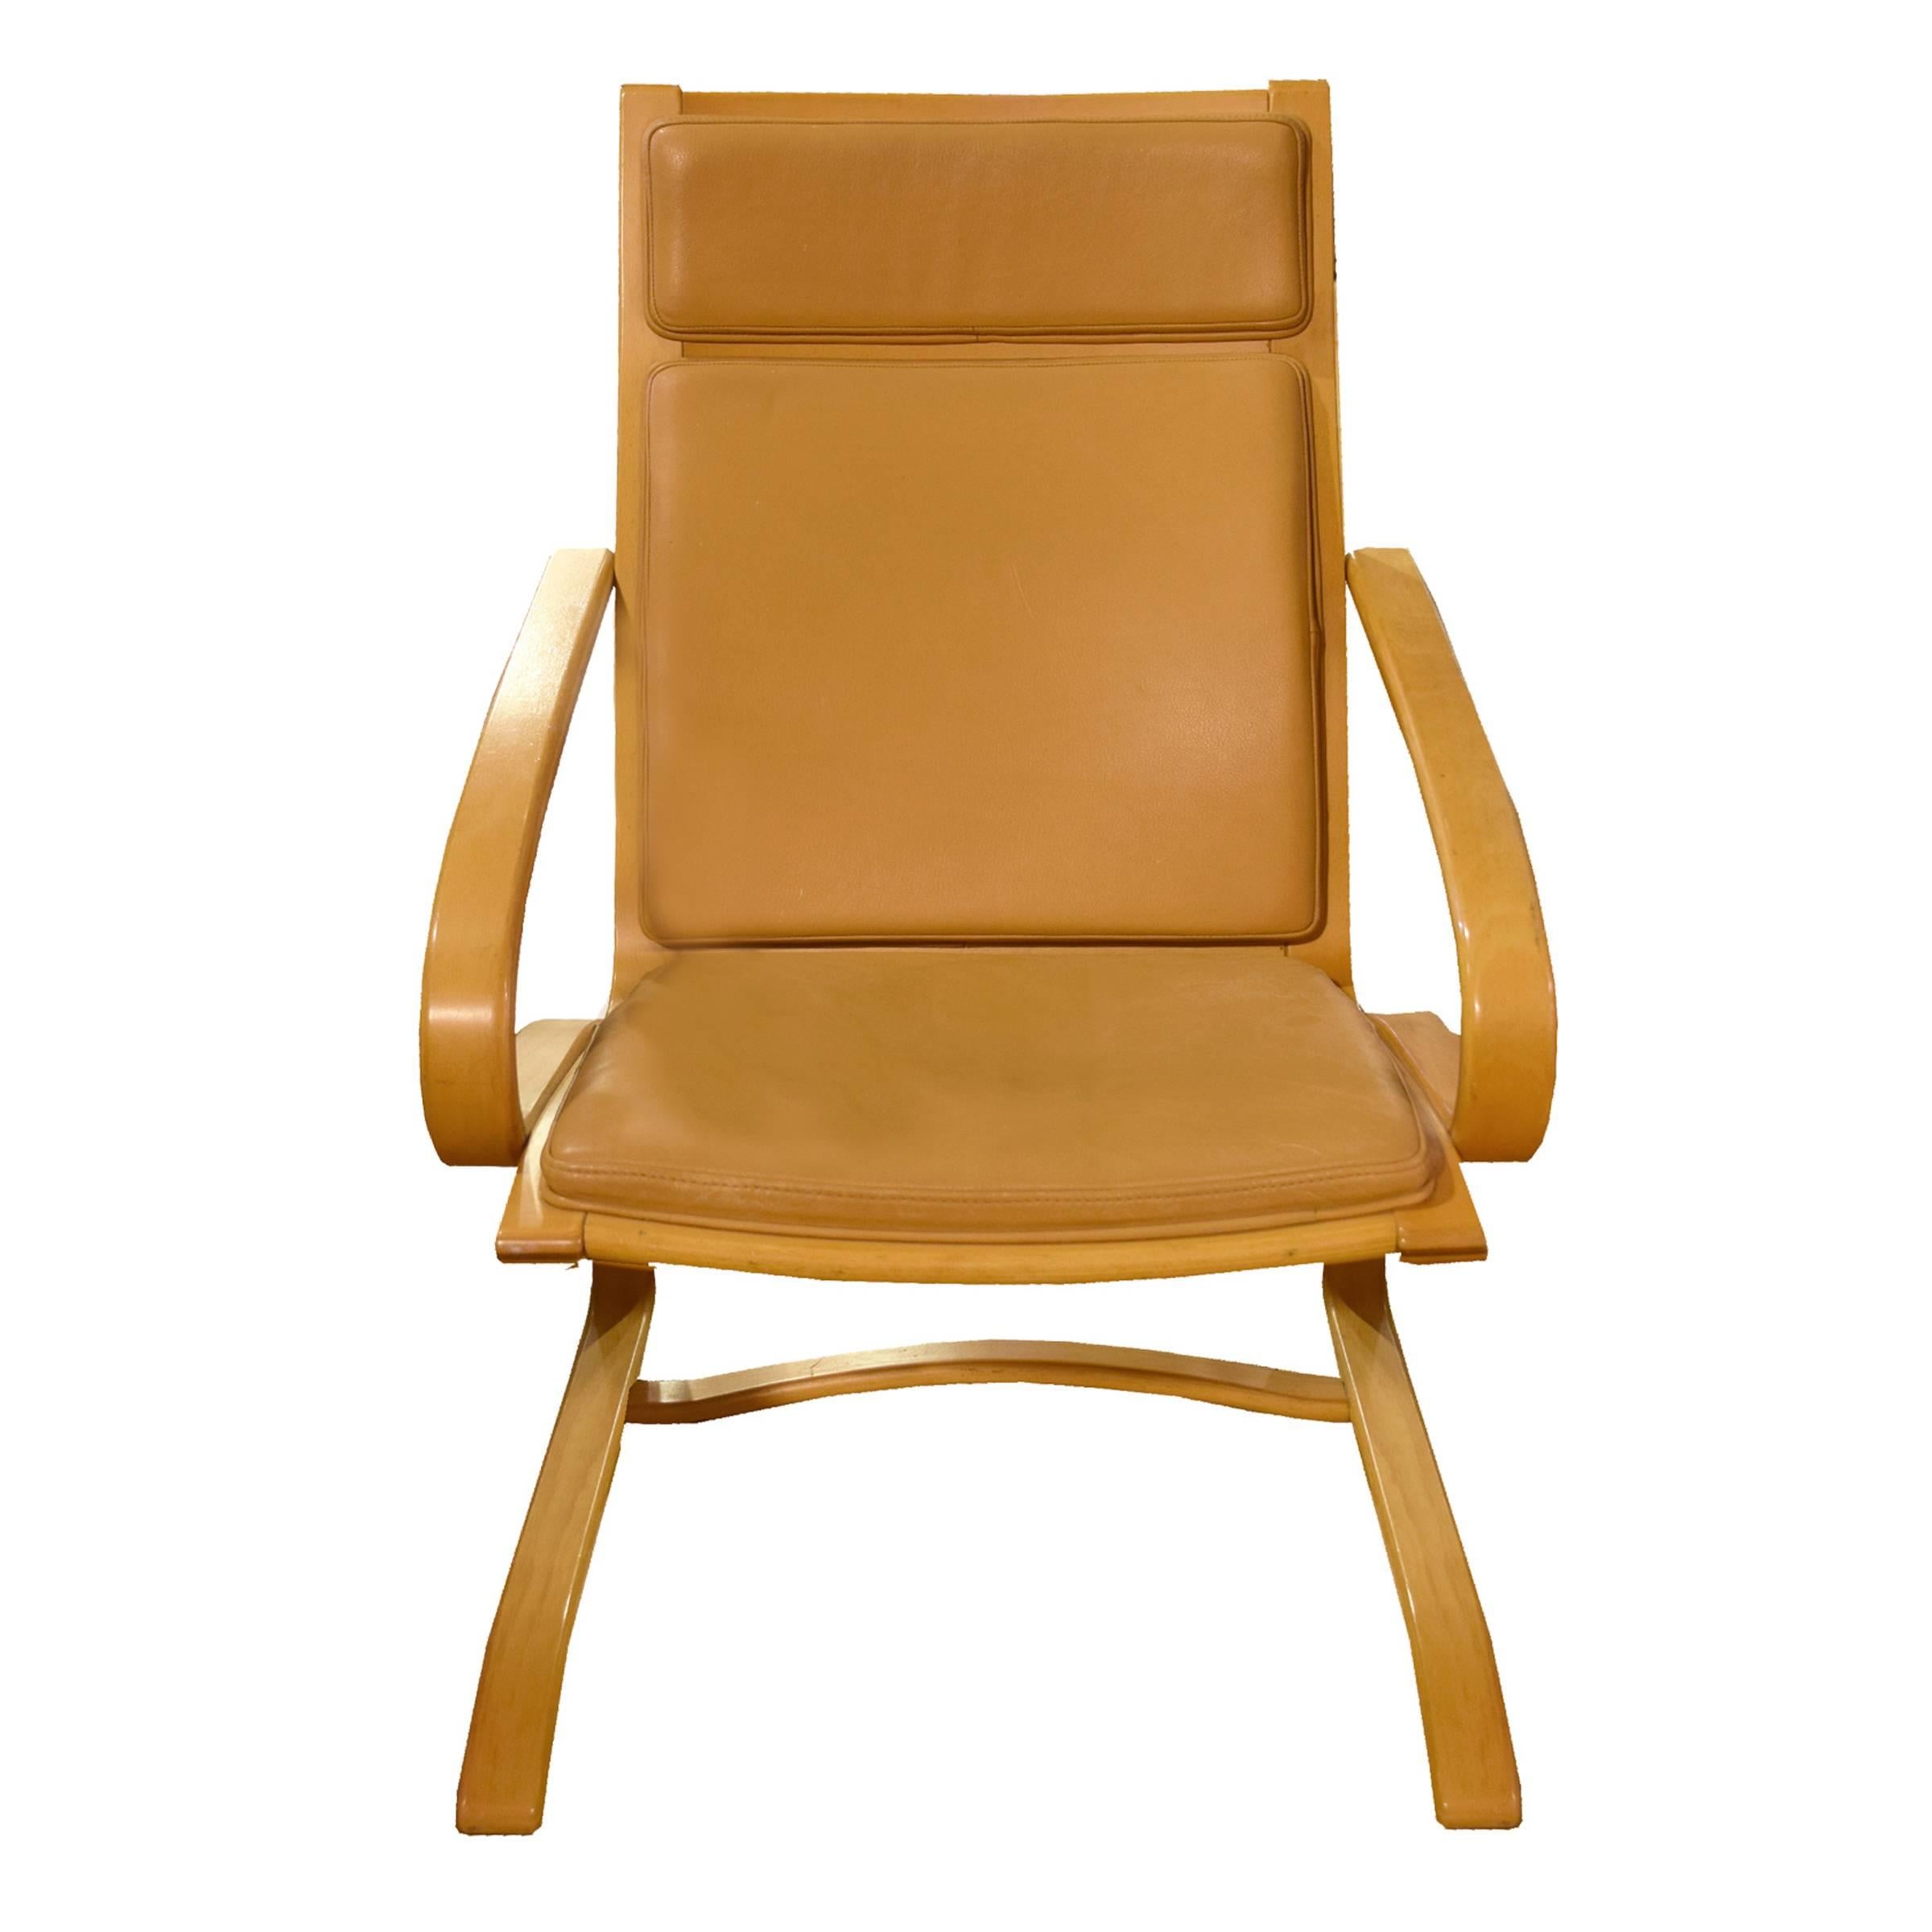 A pair of Italian Mid-Century chairs with bentwood frames and upholstered seats and backs.